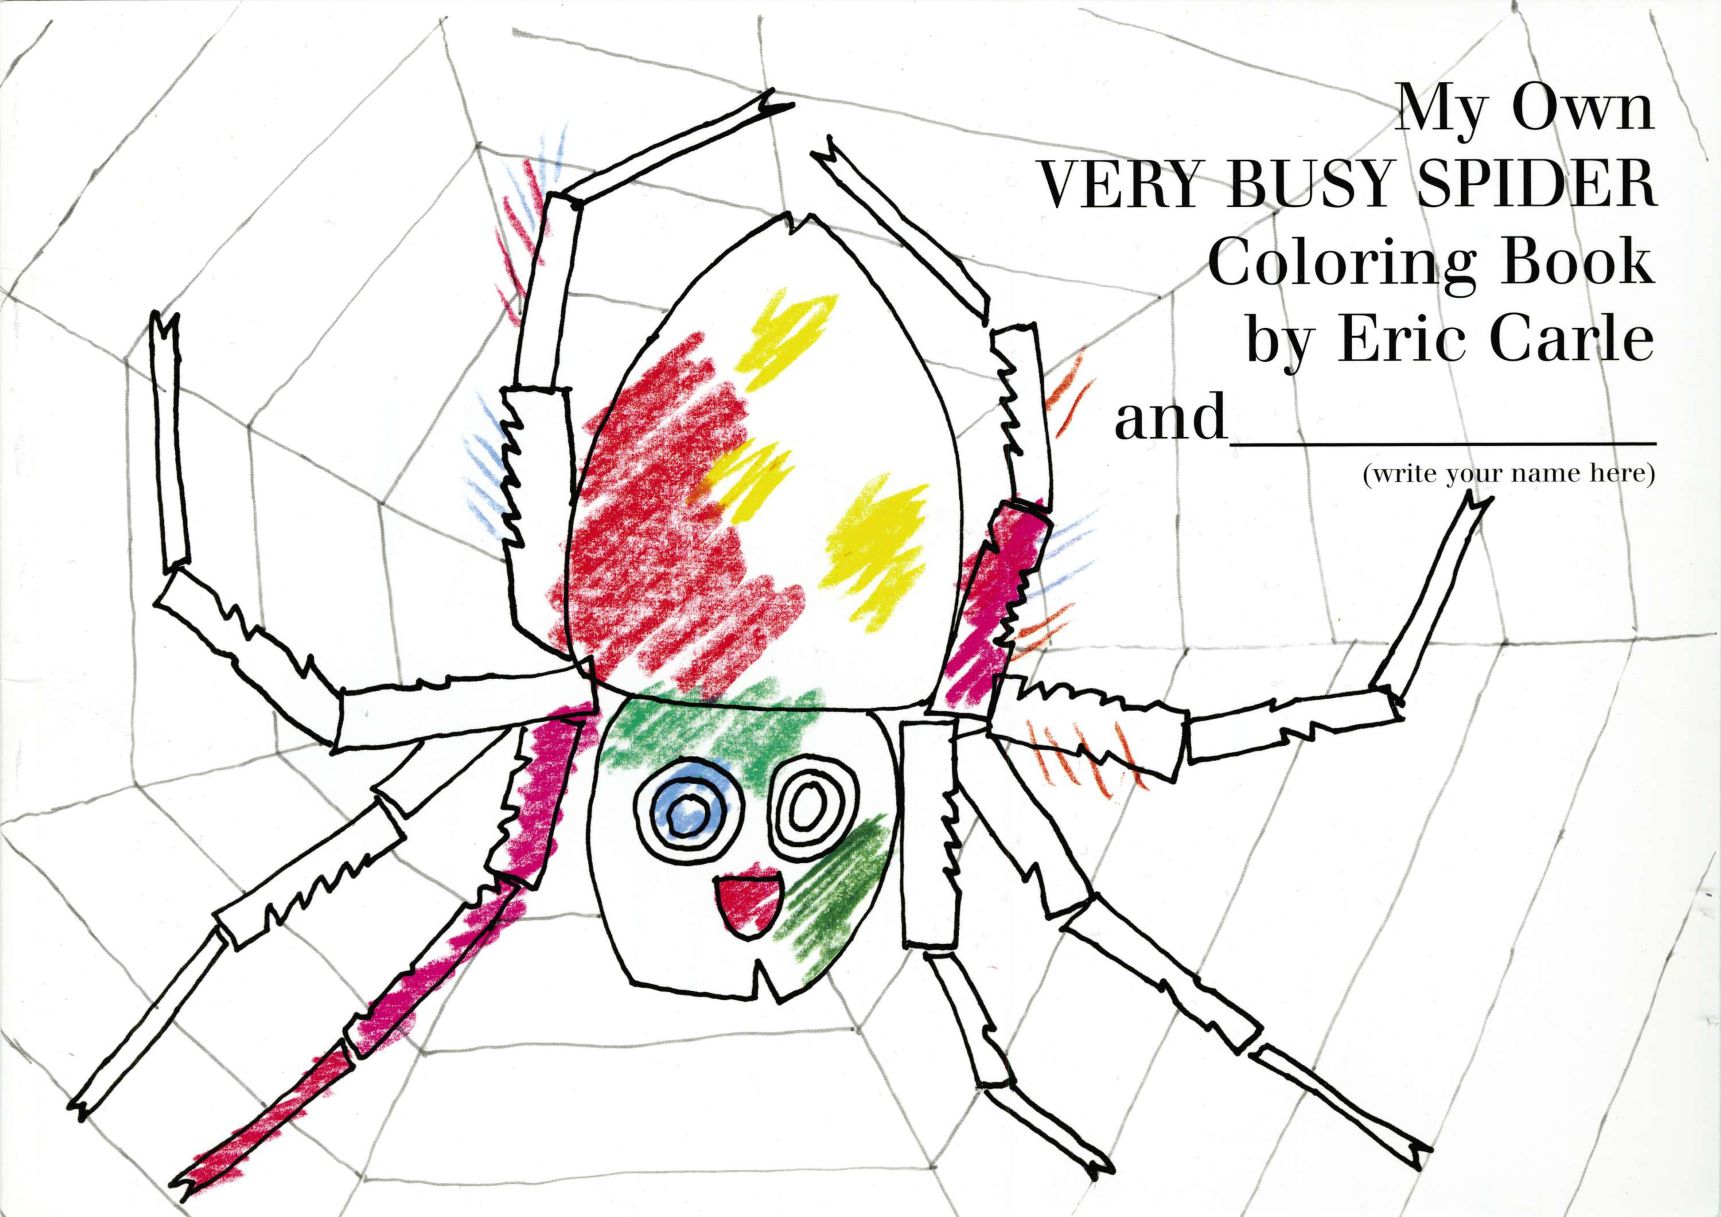 My Own Very Busy Spider (Coloring Book)